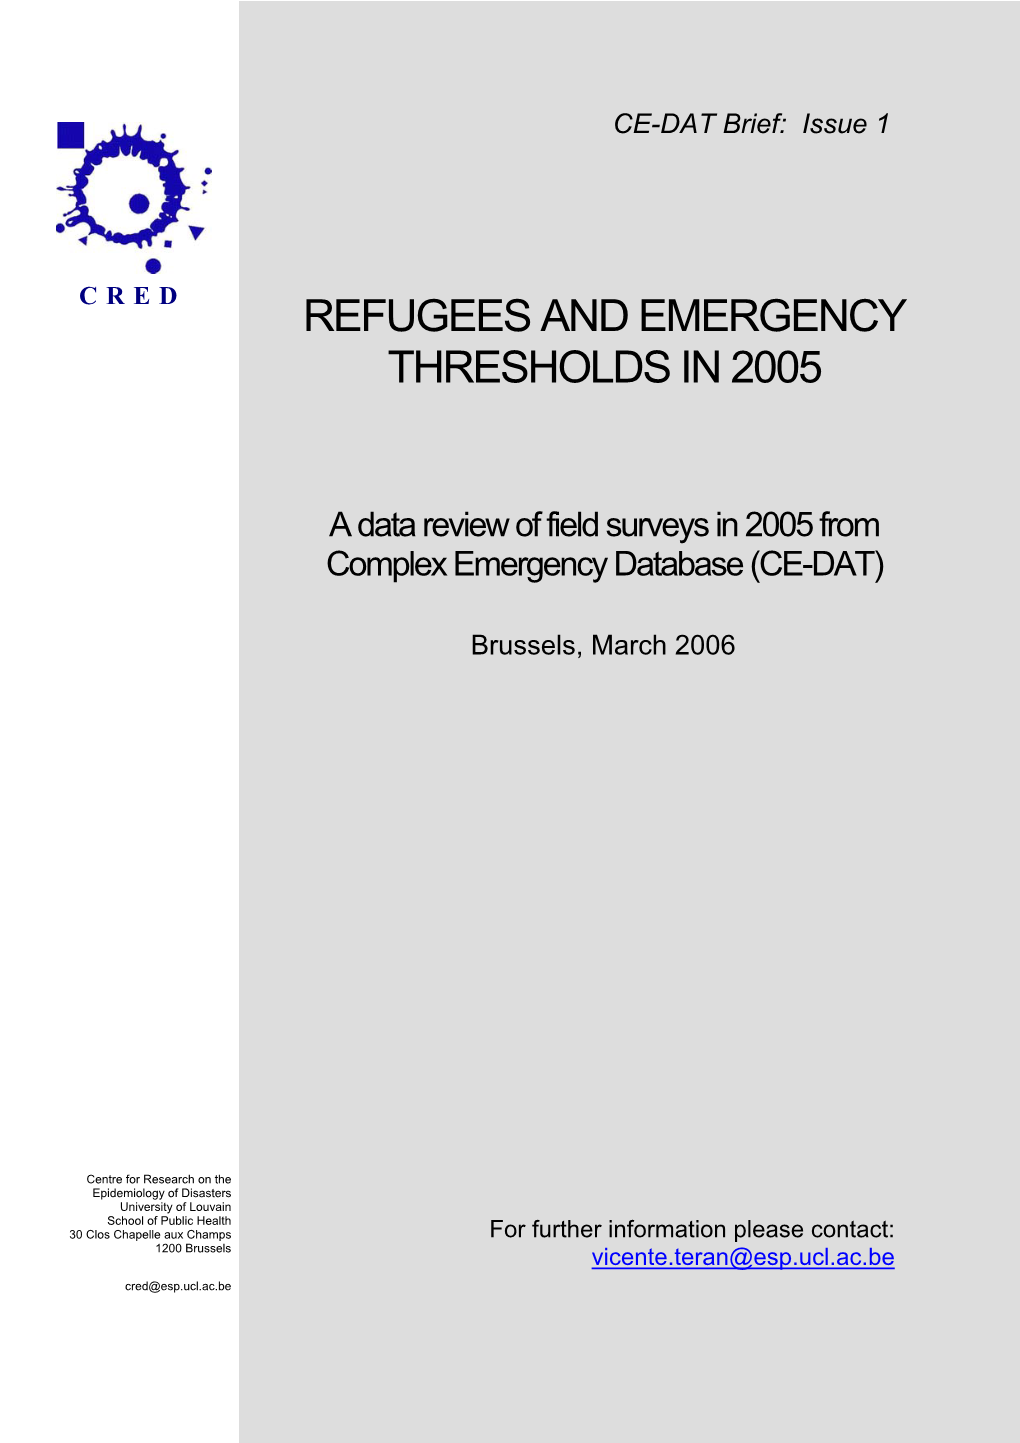 Refugees and Emergency Thresholds in 2005